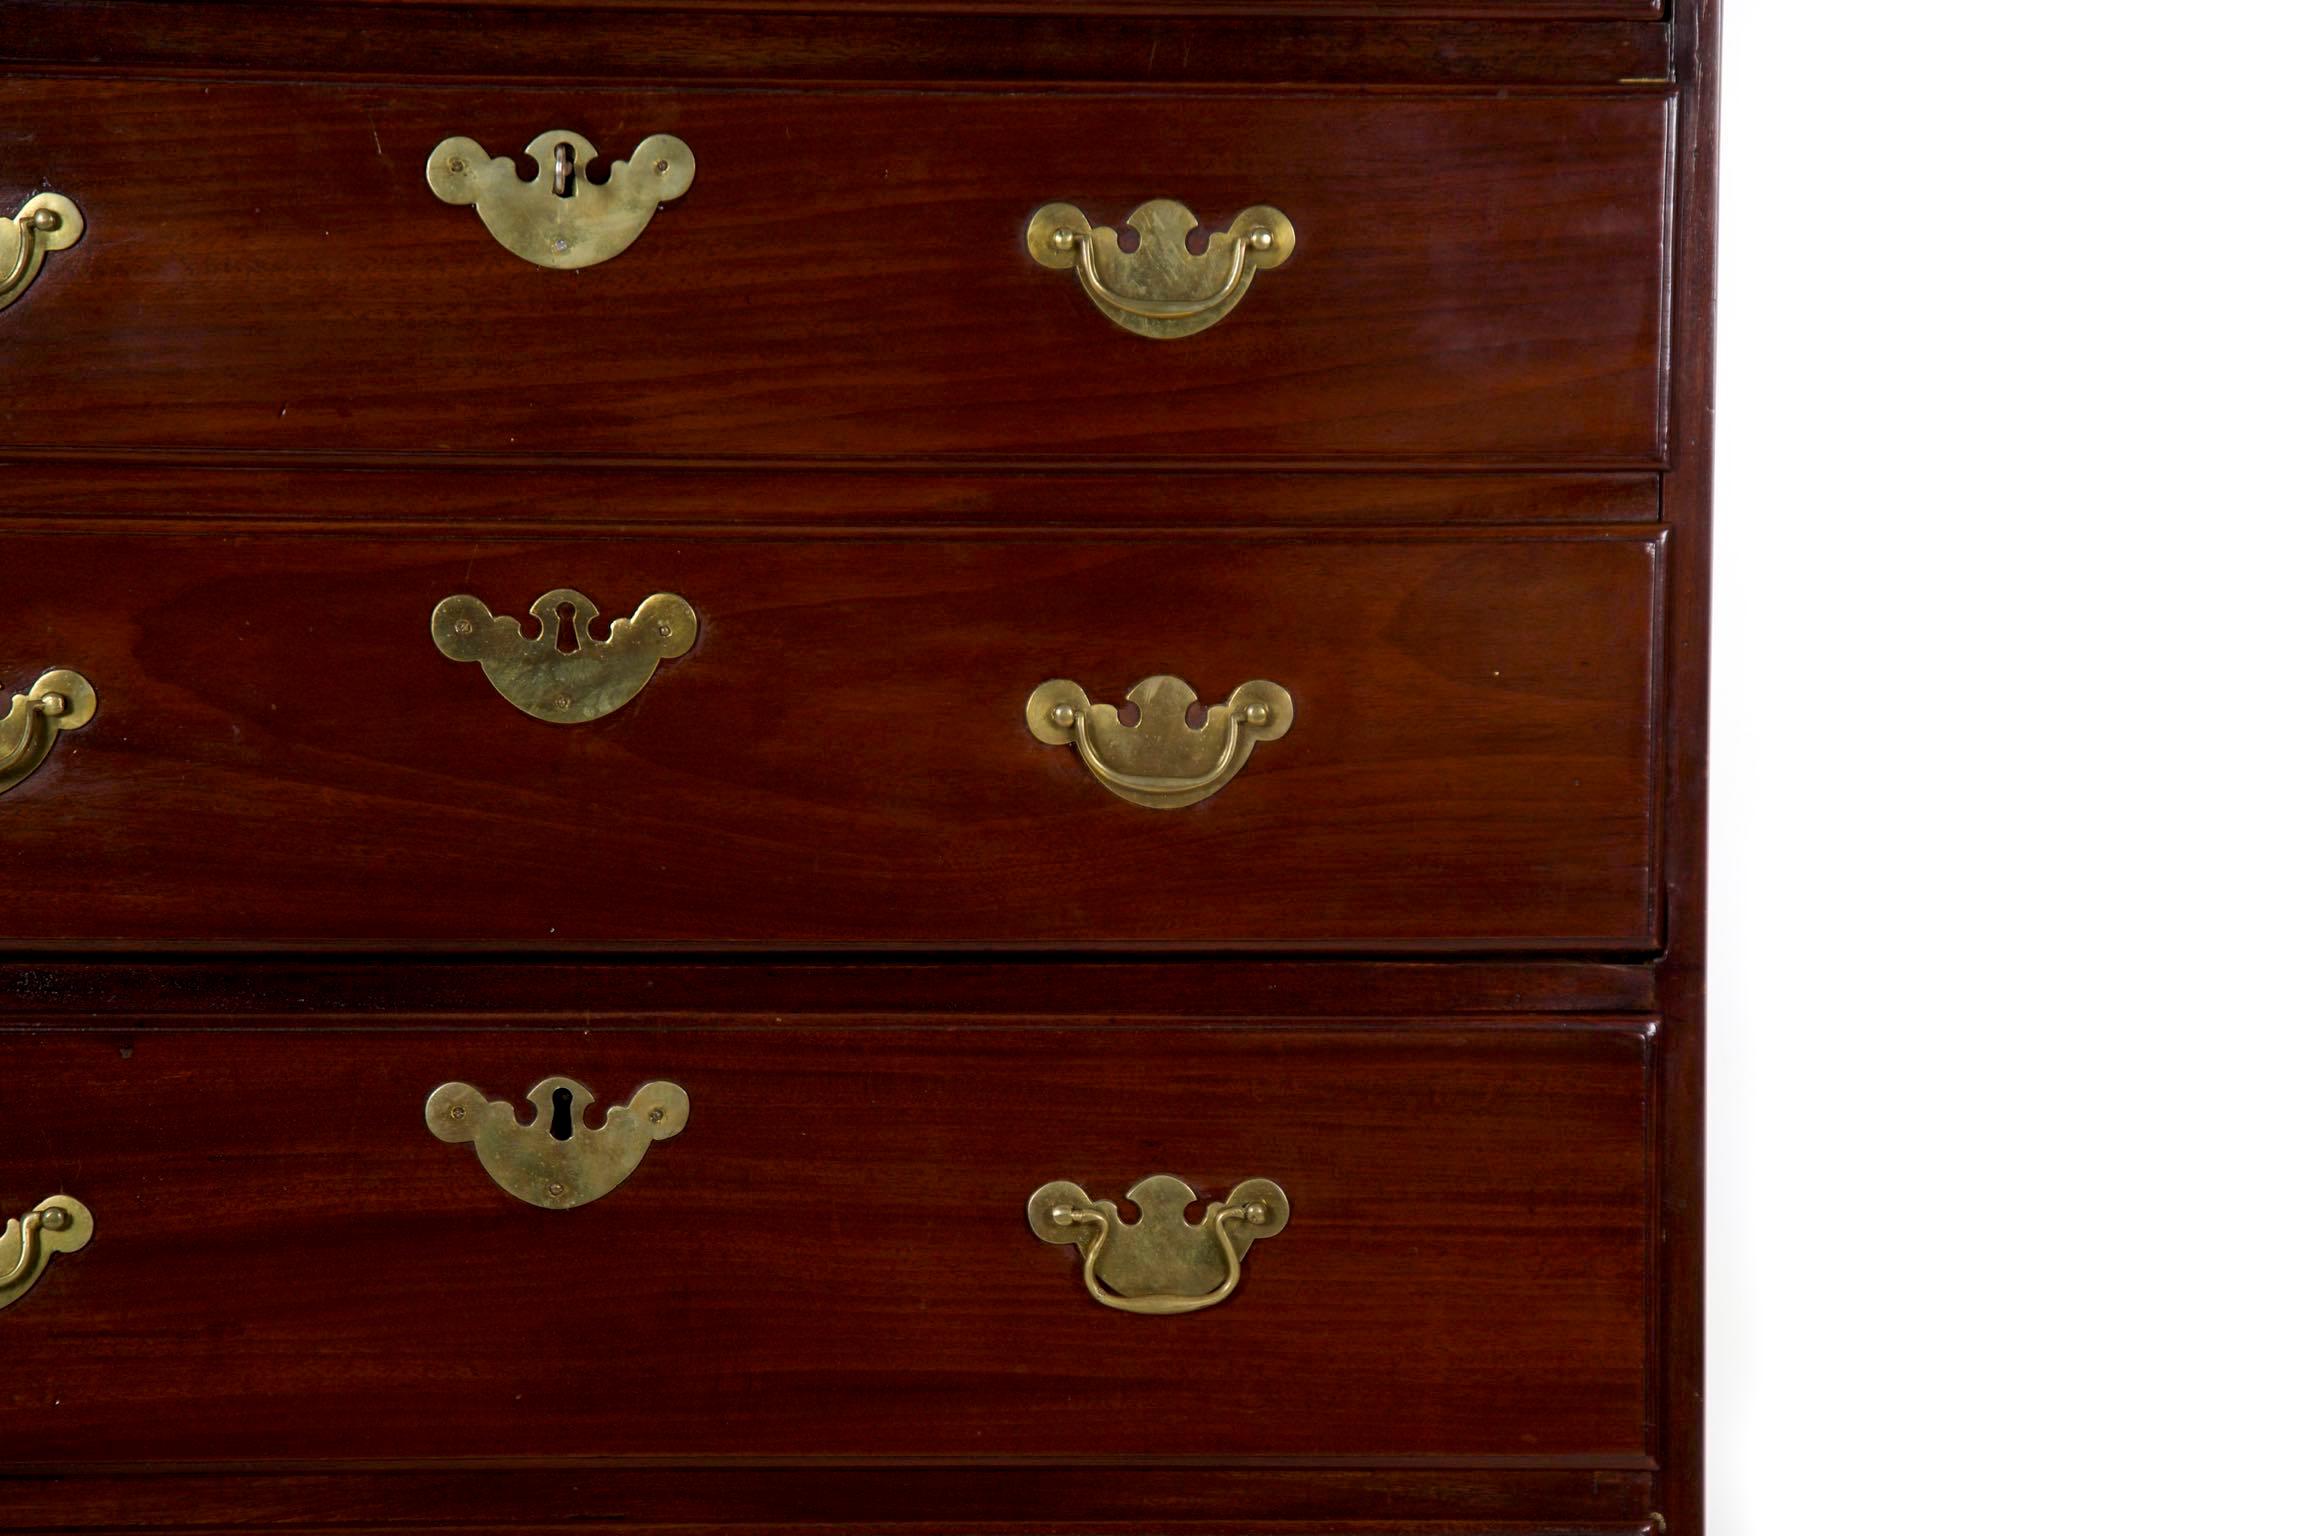 George III English Chippendale Mahogany Tall Chest of Drawers with Secretary Desk